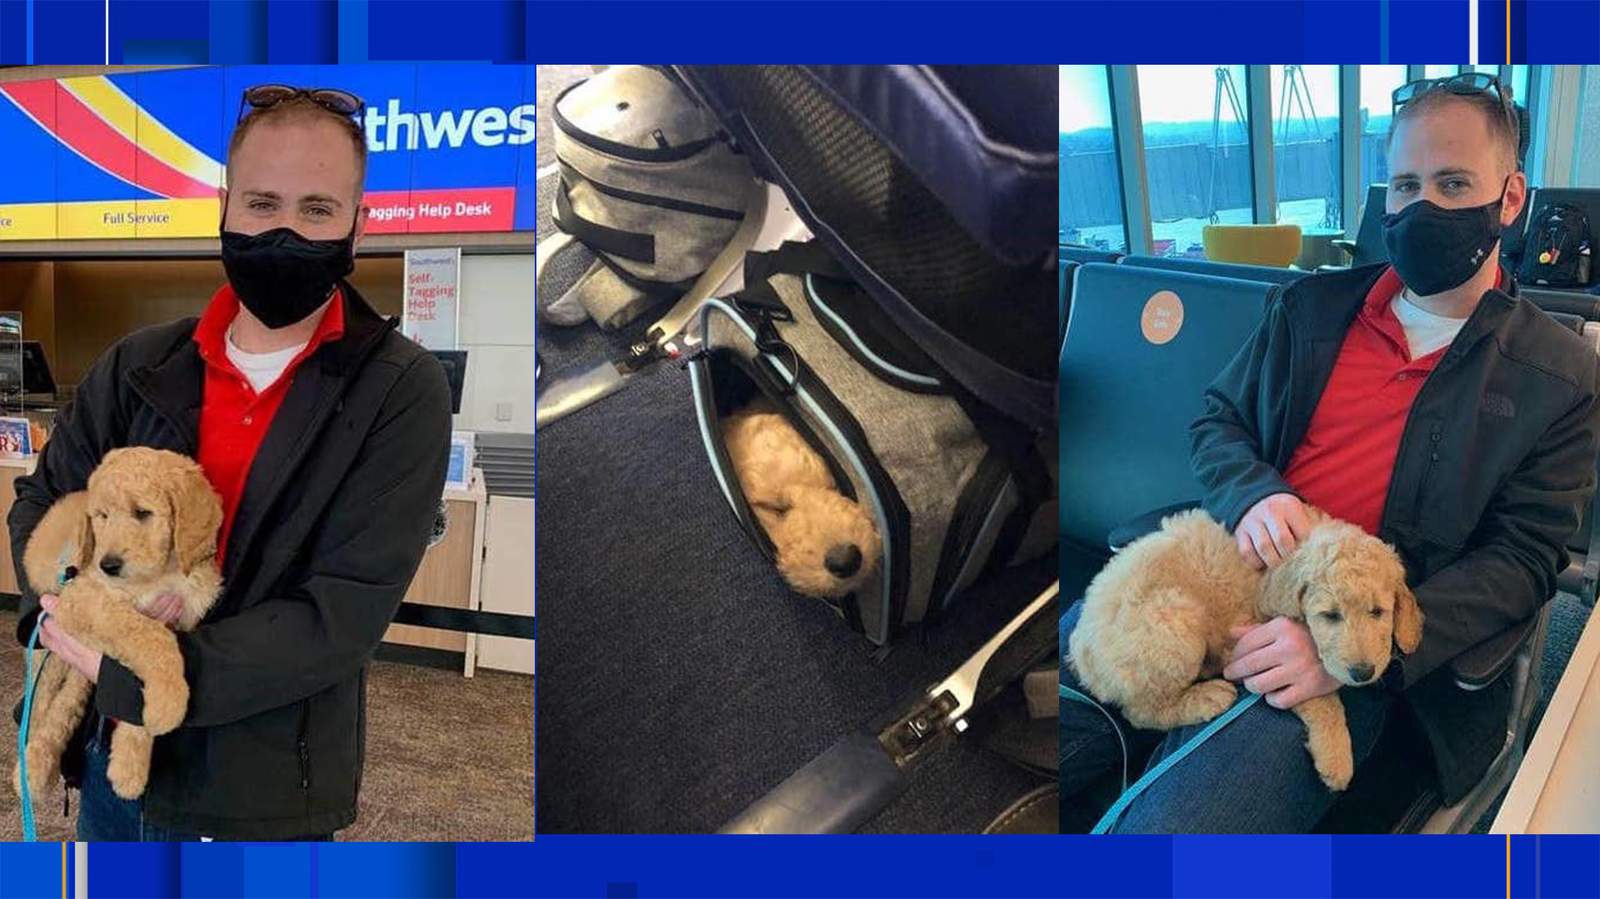 Southwest Airlines dispatcher travels over 3,000 miles to help deliver puppy for Christmas